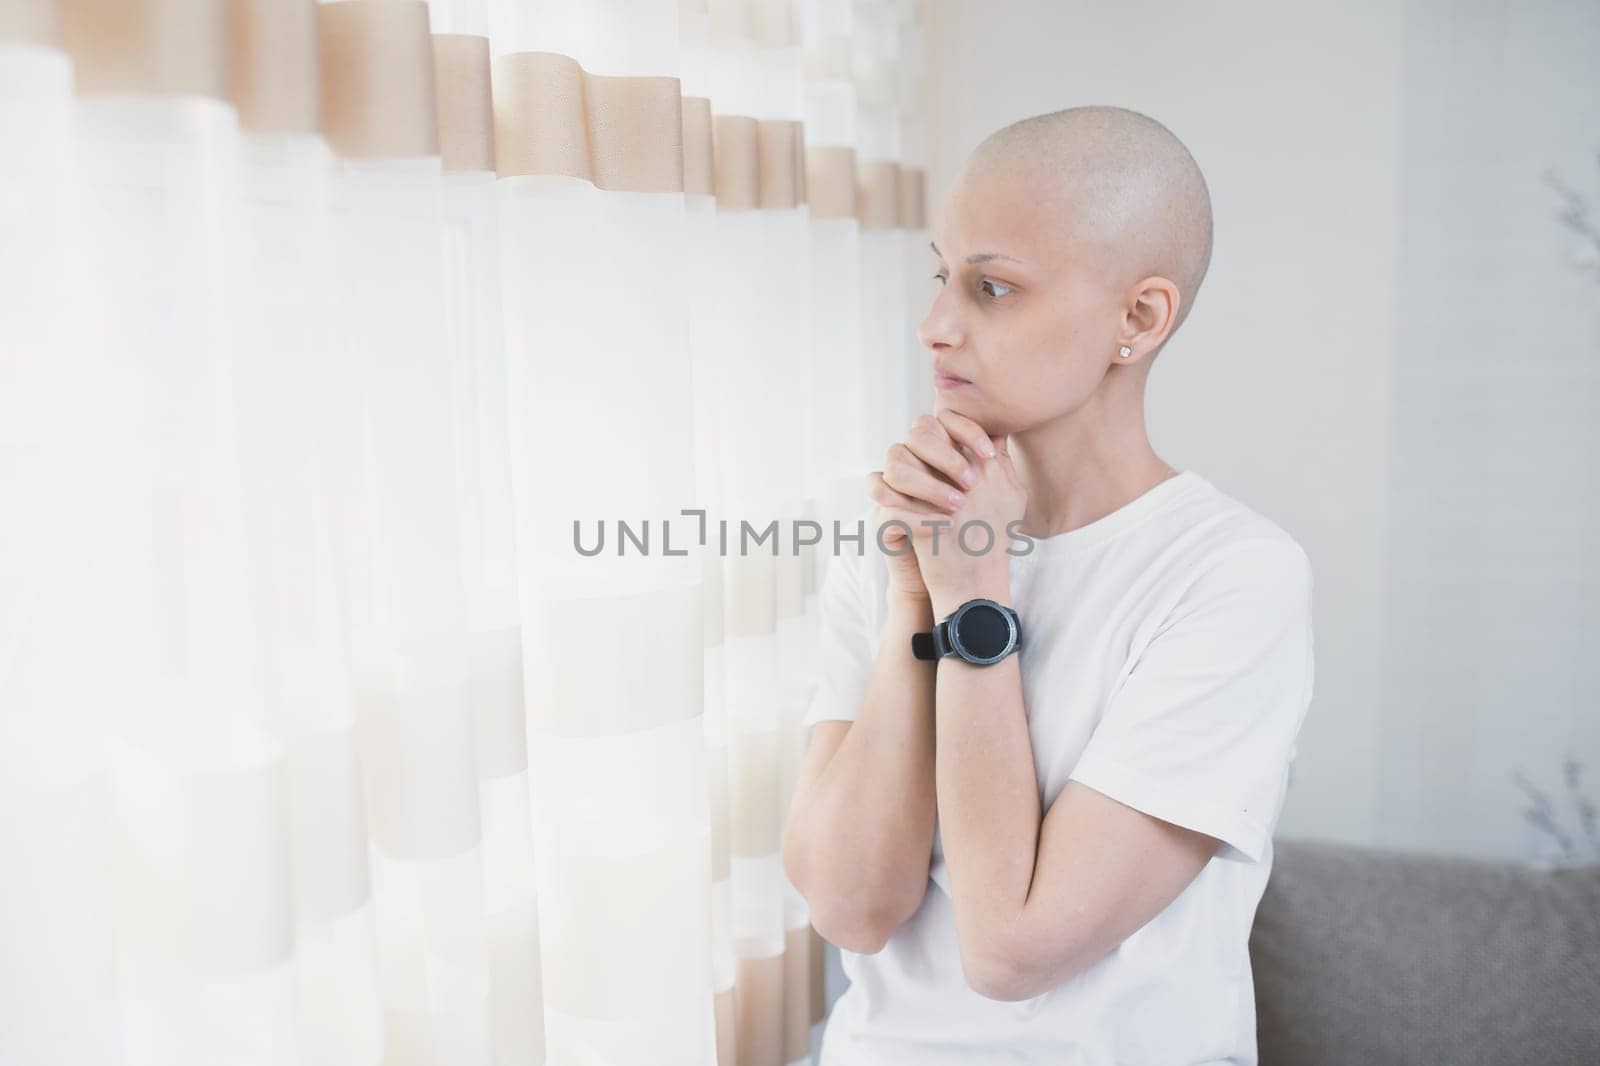 Woman with oncology after chemotherapy praying alone in room.